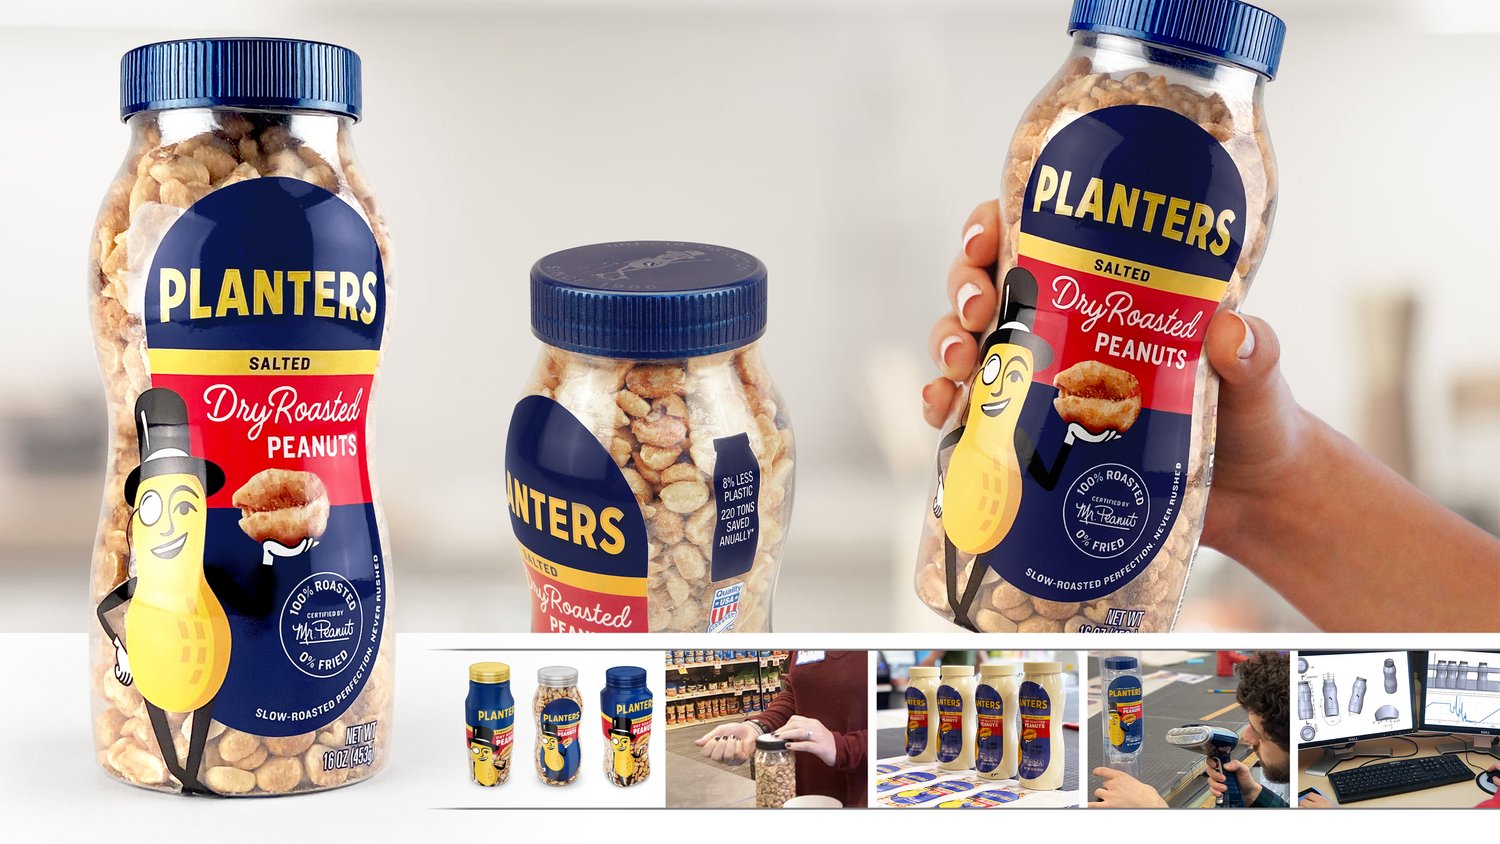 photo of Planters Peanuts package design